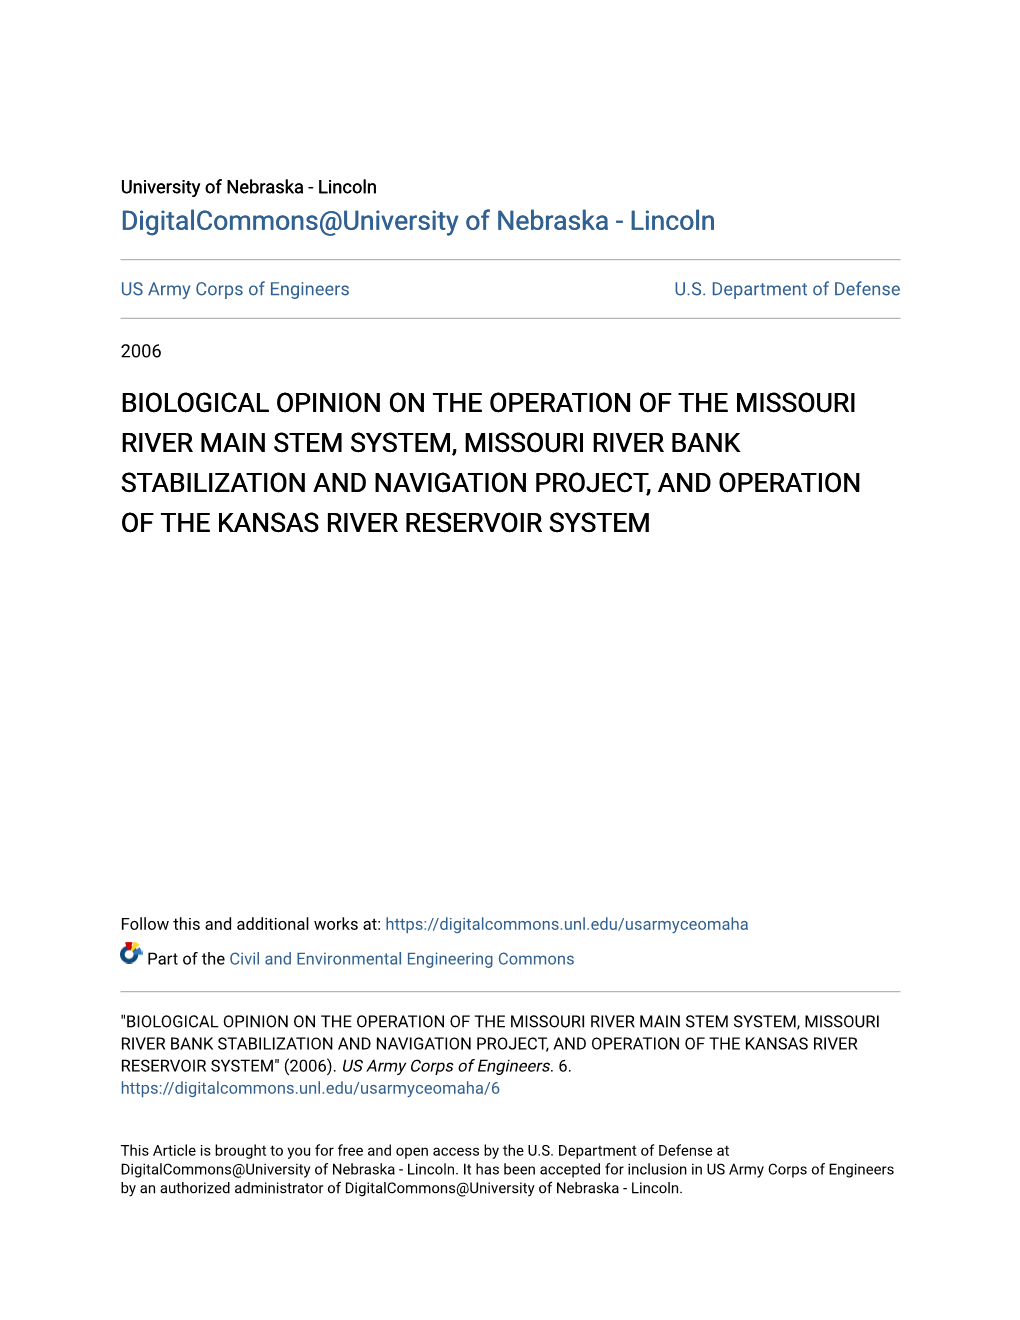 Biological Opinion on the Operation of the Missouri River Main Stem System